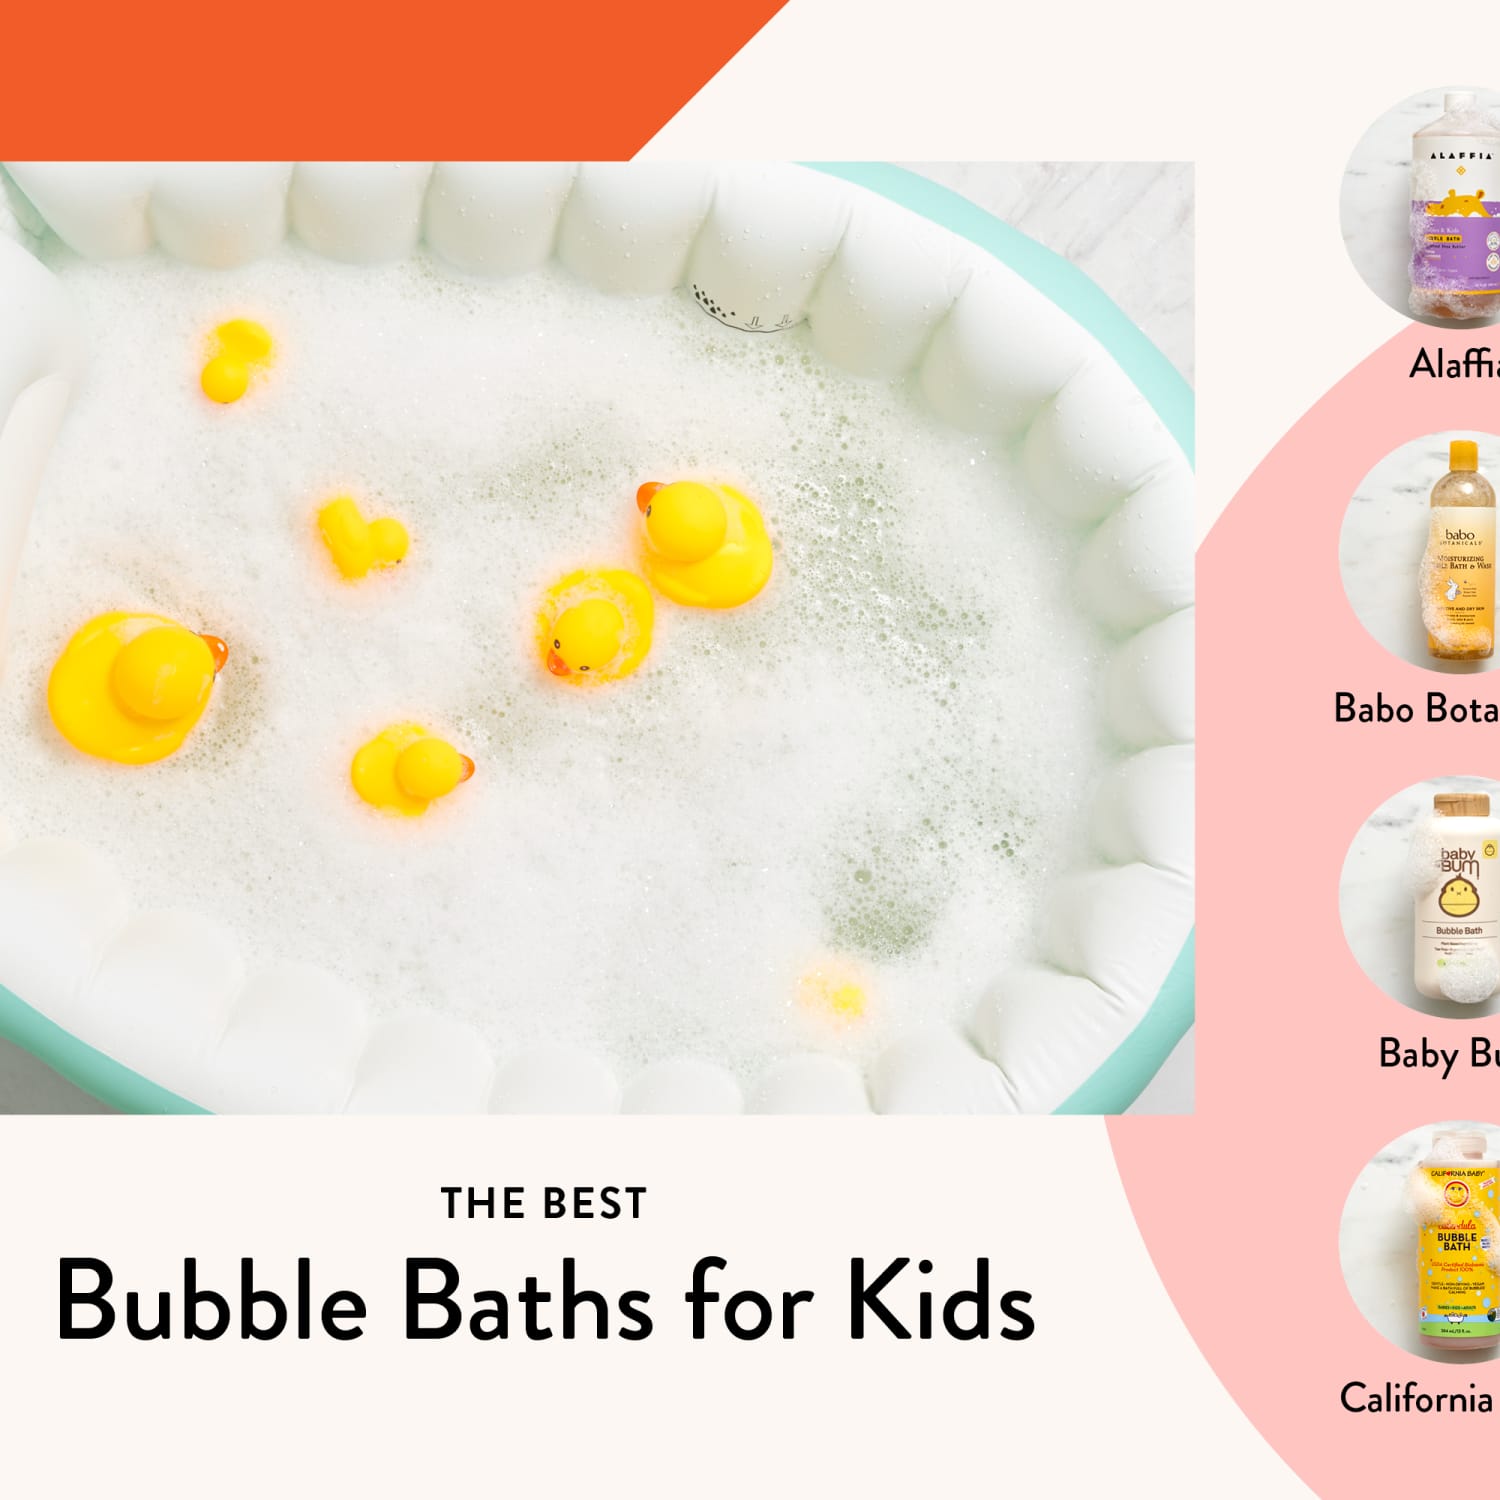 The Best Bubble Baths for Kids (Tested & Ranked)